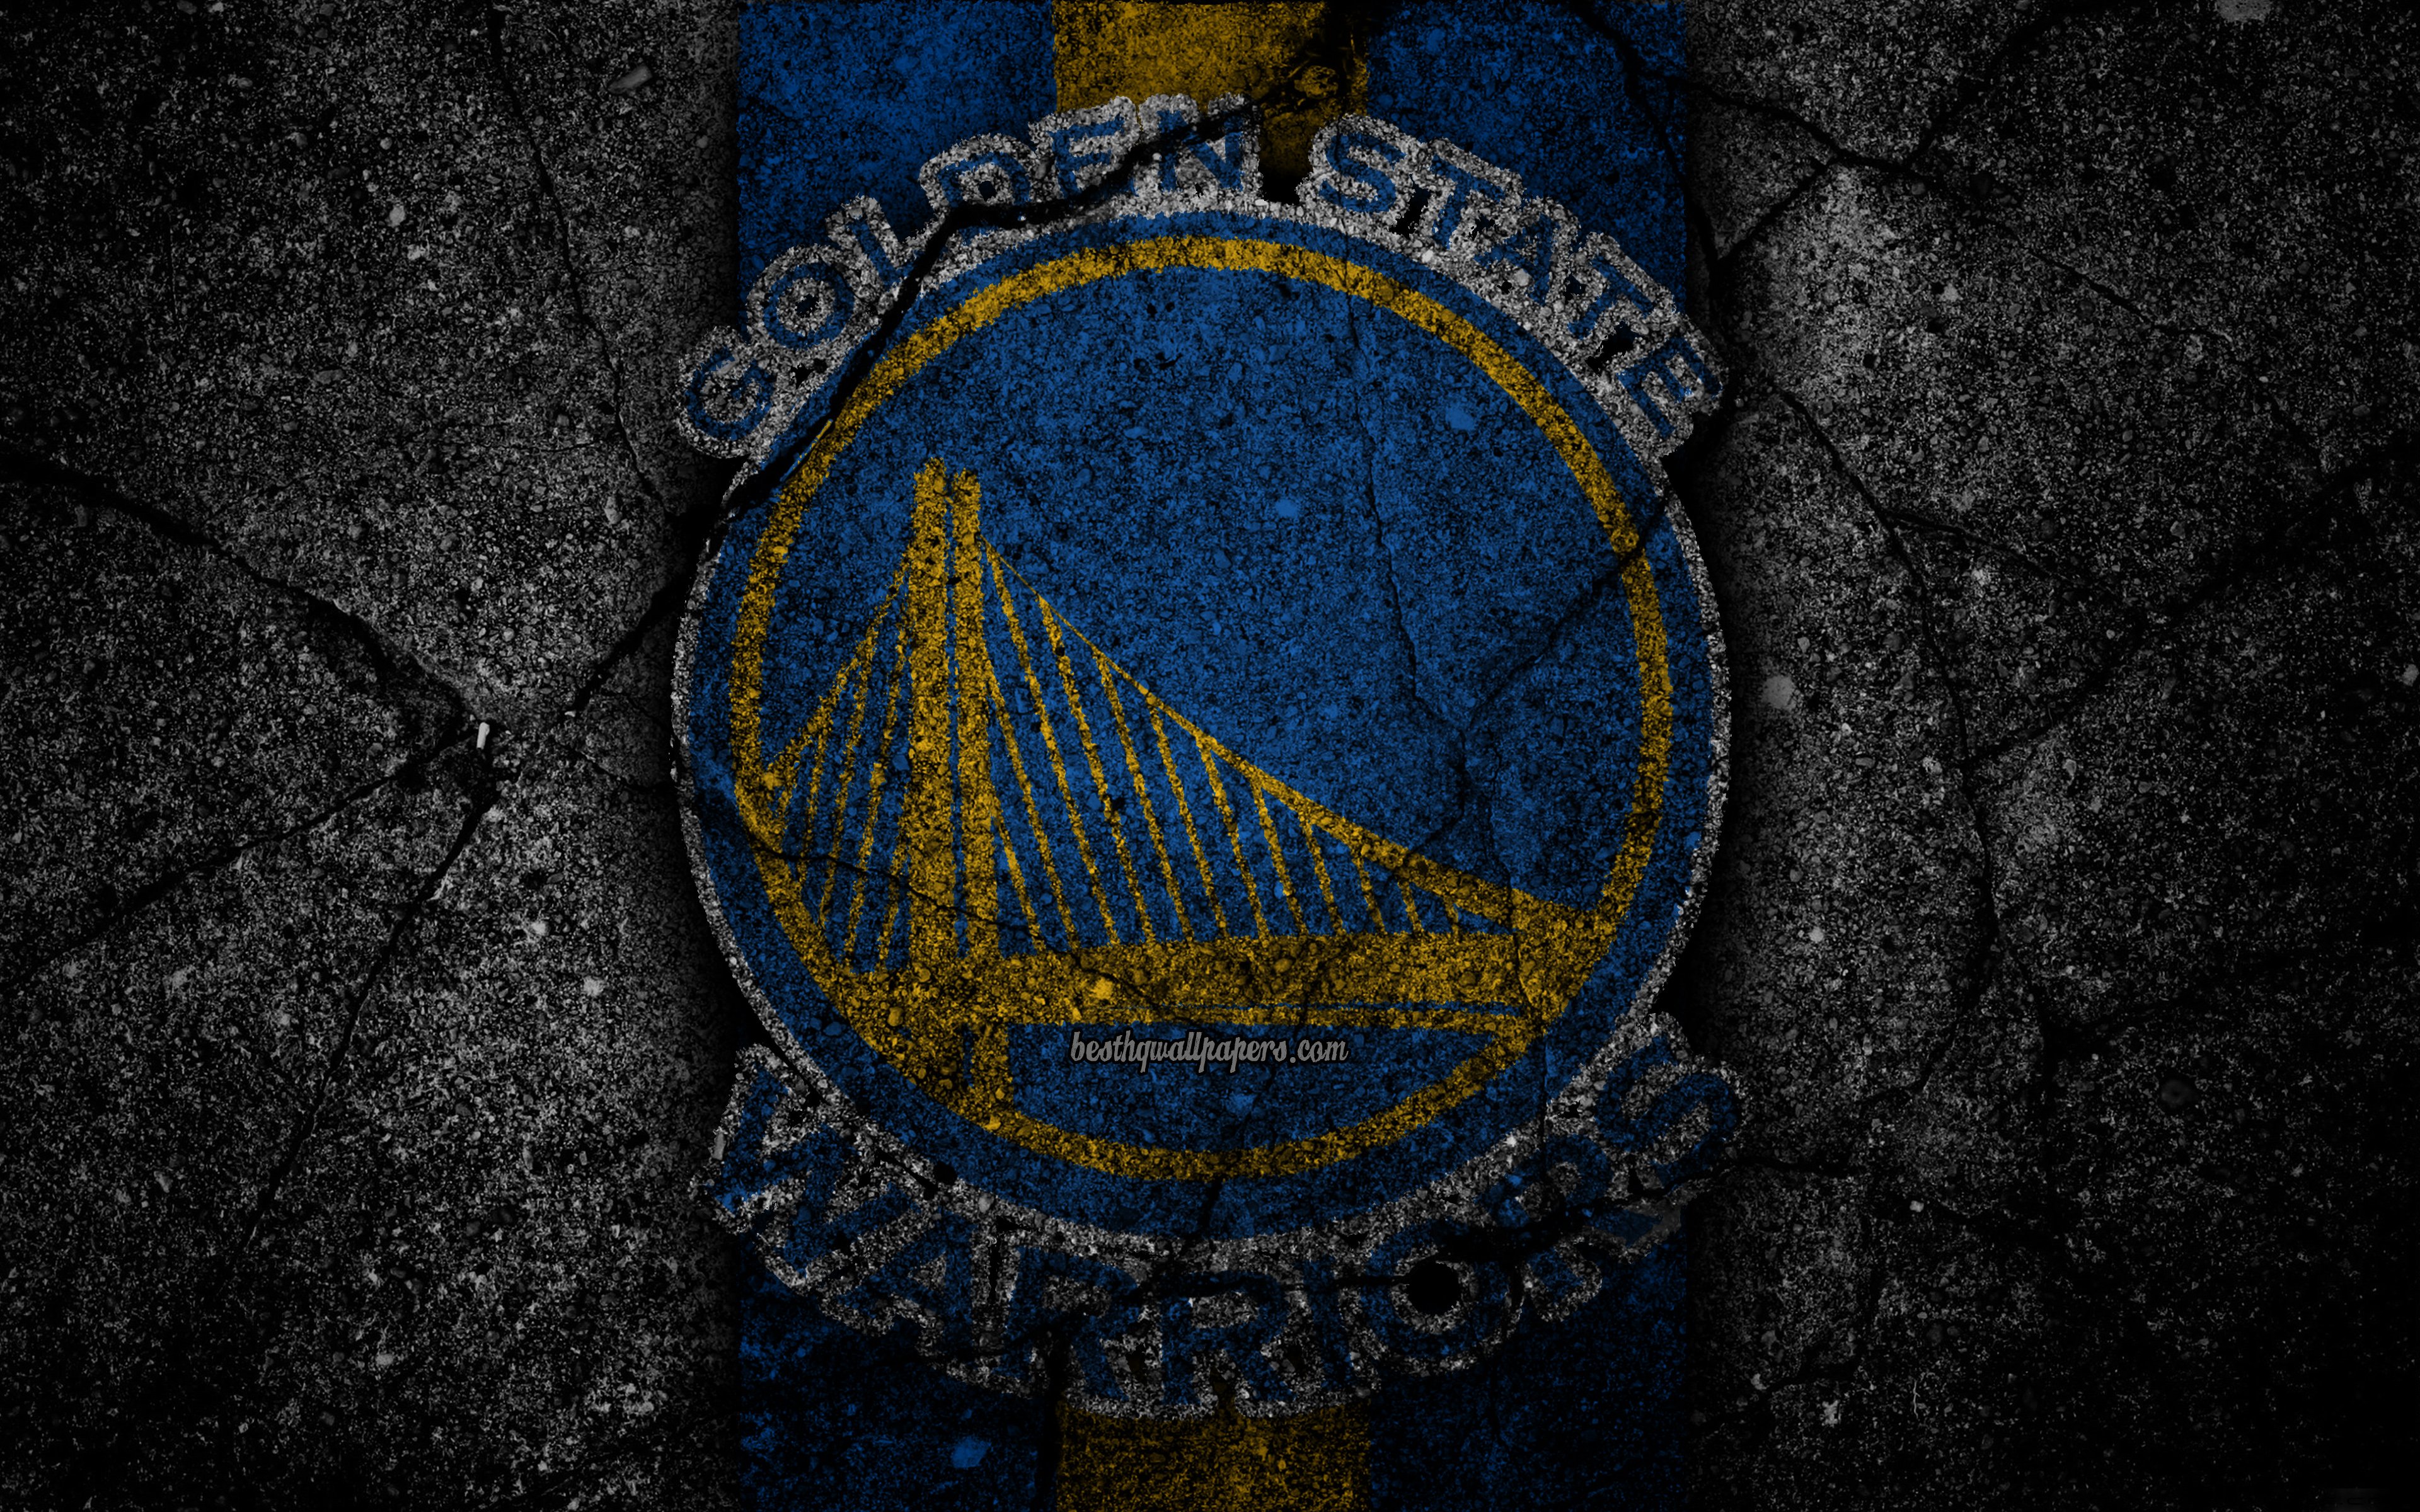 Download wallpaper Golden State Warriors, NBA, 4k, logo, black stone, basketball, Western Conference, asphalt texture, USA, creative, basketball club, Golden State Warriors logo for desktop with resolution 3840x2400. High Quality HD picture